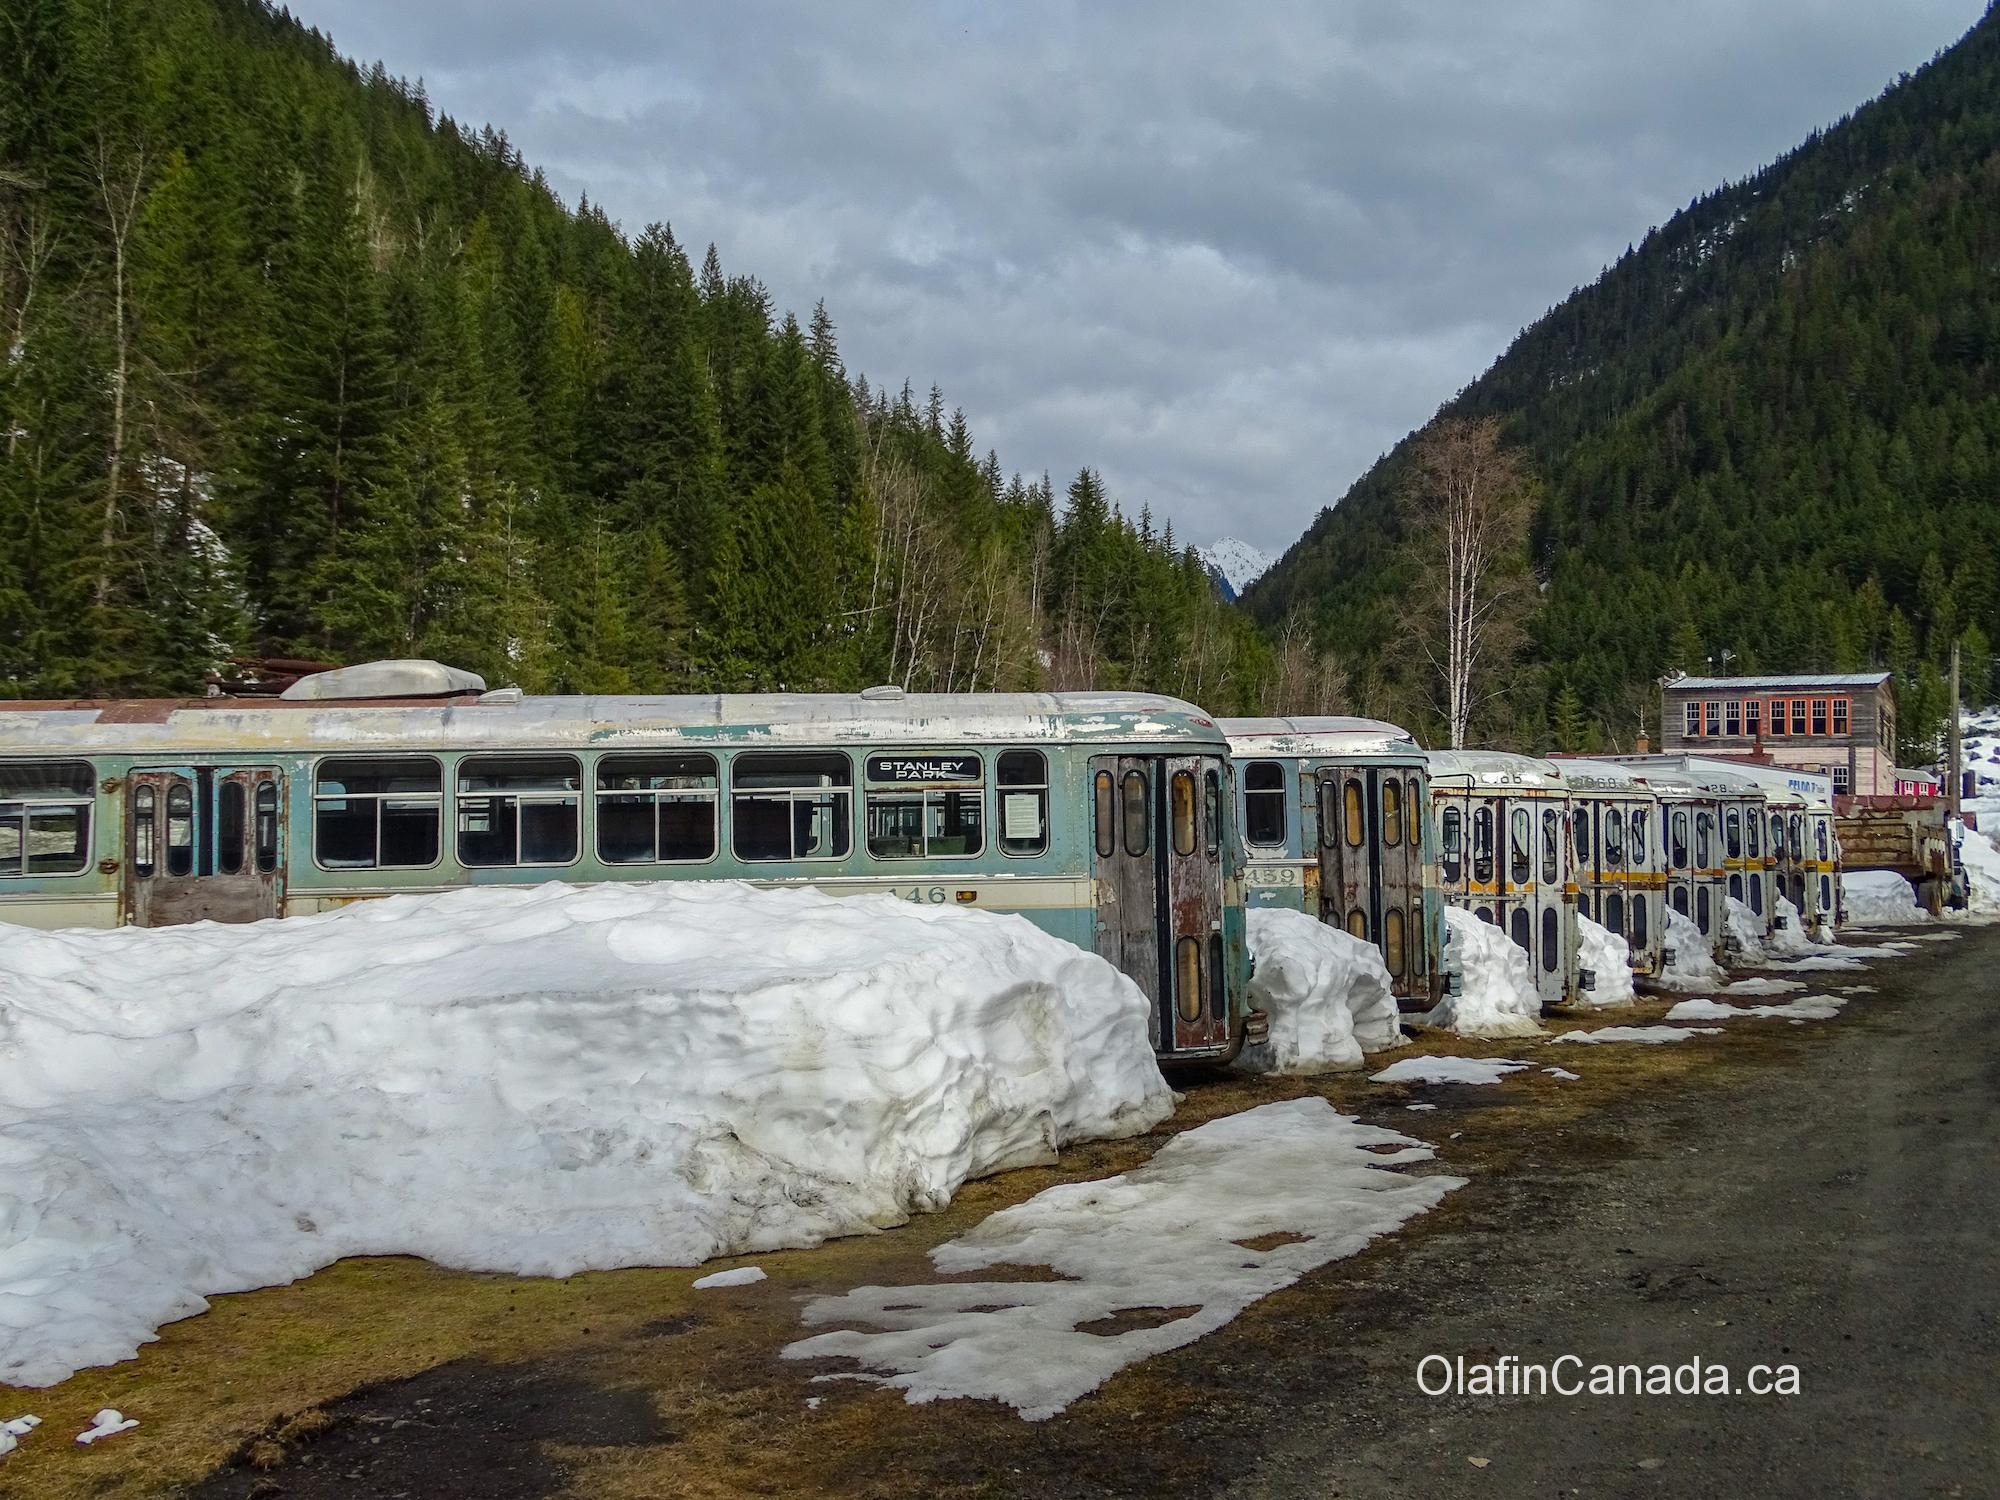 Vancouver busses from the fifties #olafincanada #britishcolumbia #discoverbc #abandonedbc #sandon #busses